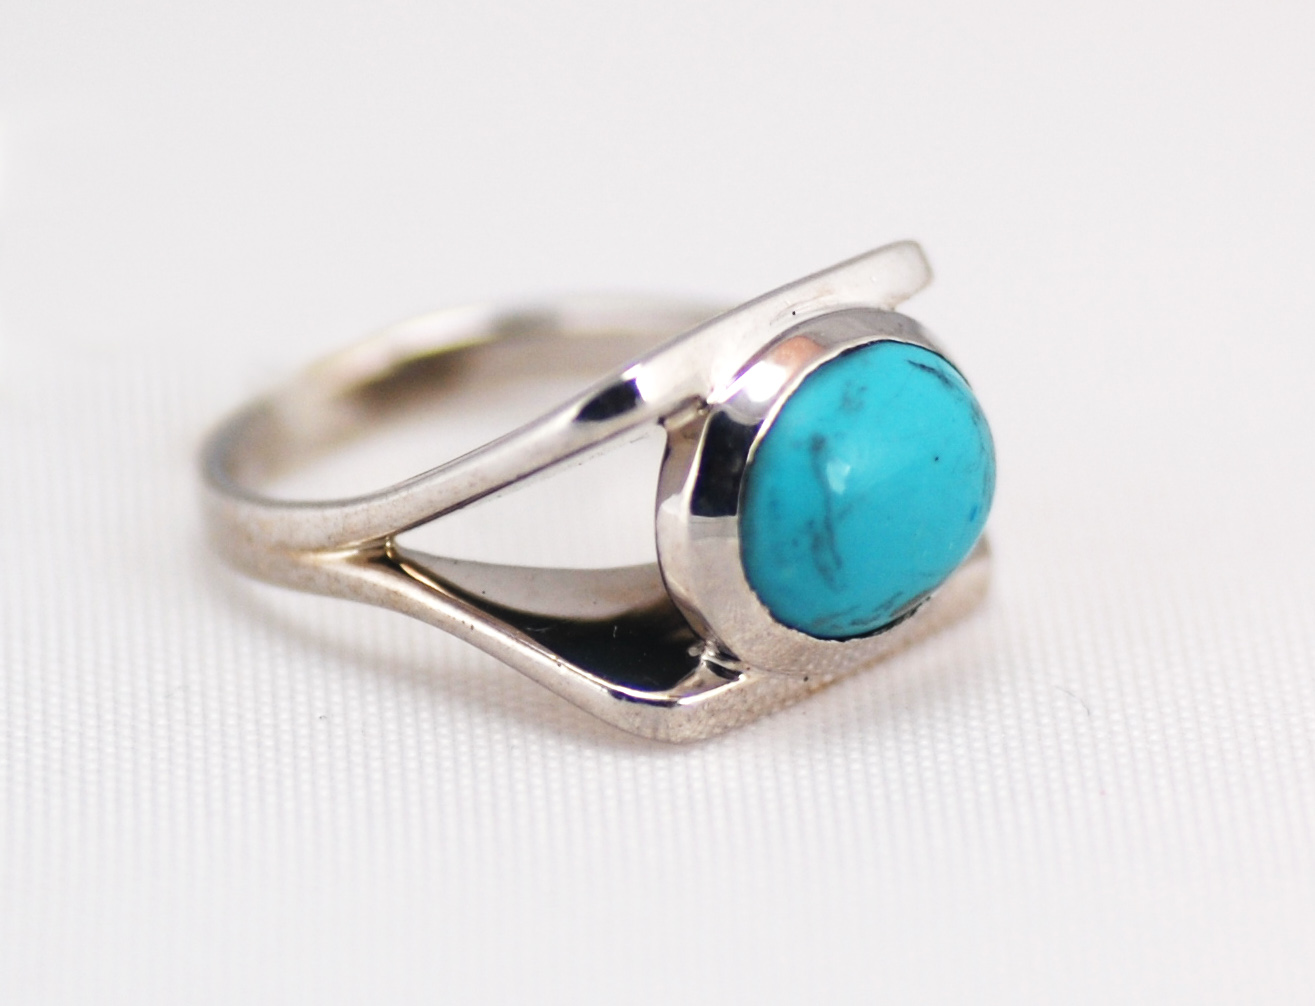 Frank Reubel Sterling Silver Turquoise Ring